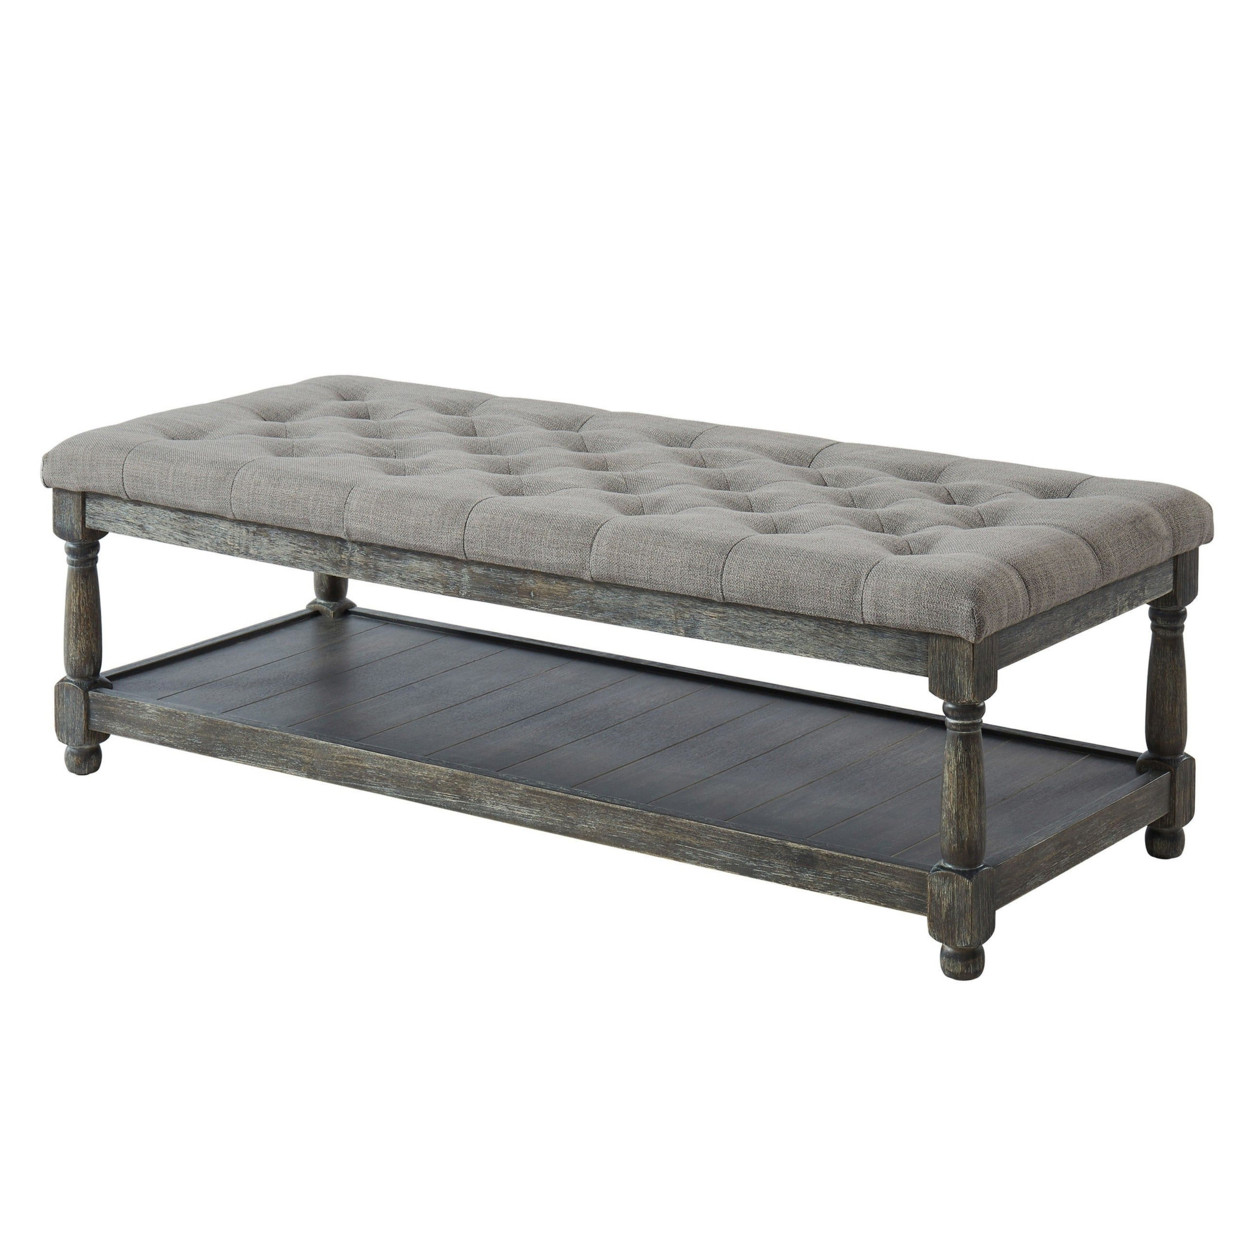 Fabric Upholstered Bench With Button Tufted Seat And Bottom Shelf, Gray- Saltoro Sherpi